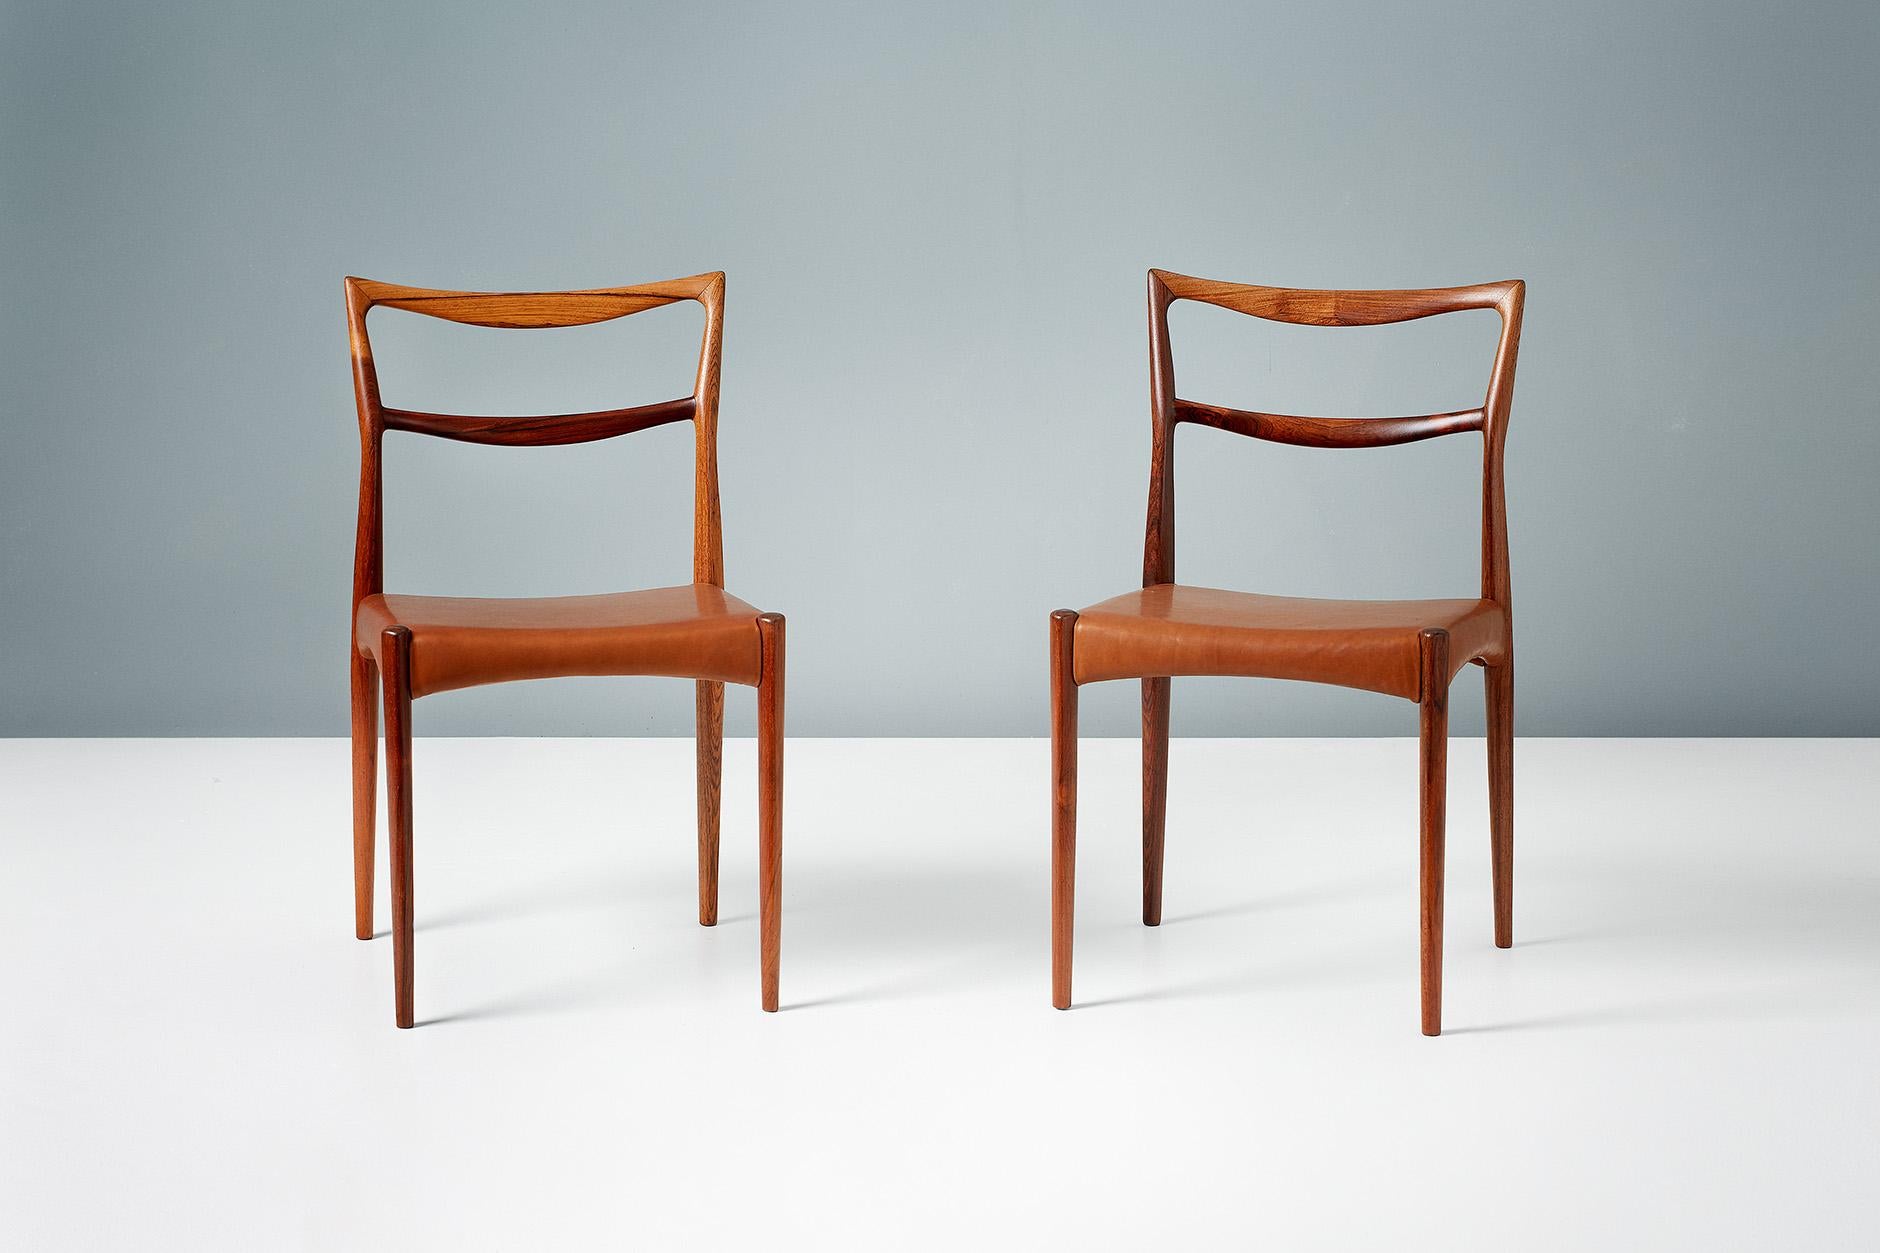 Rarely seen, sculptural dining chairs from Norwegian designer Henry W. Klein. Produced by Bramin in Denmark in exquisite Brazilian rosewood. The seats have been reupholstered in premium aniline cognac brown leather.
 
  